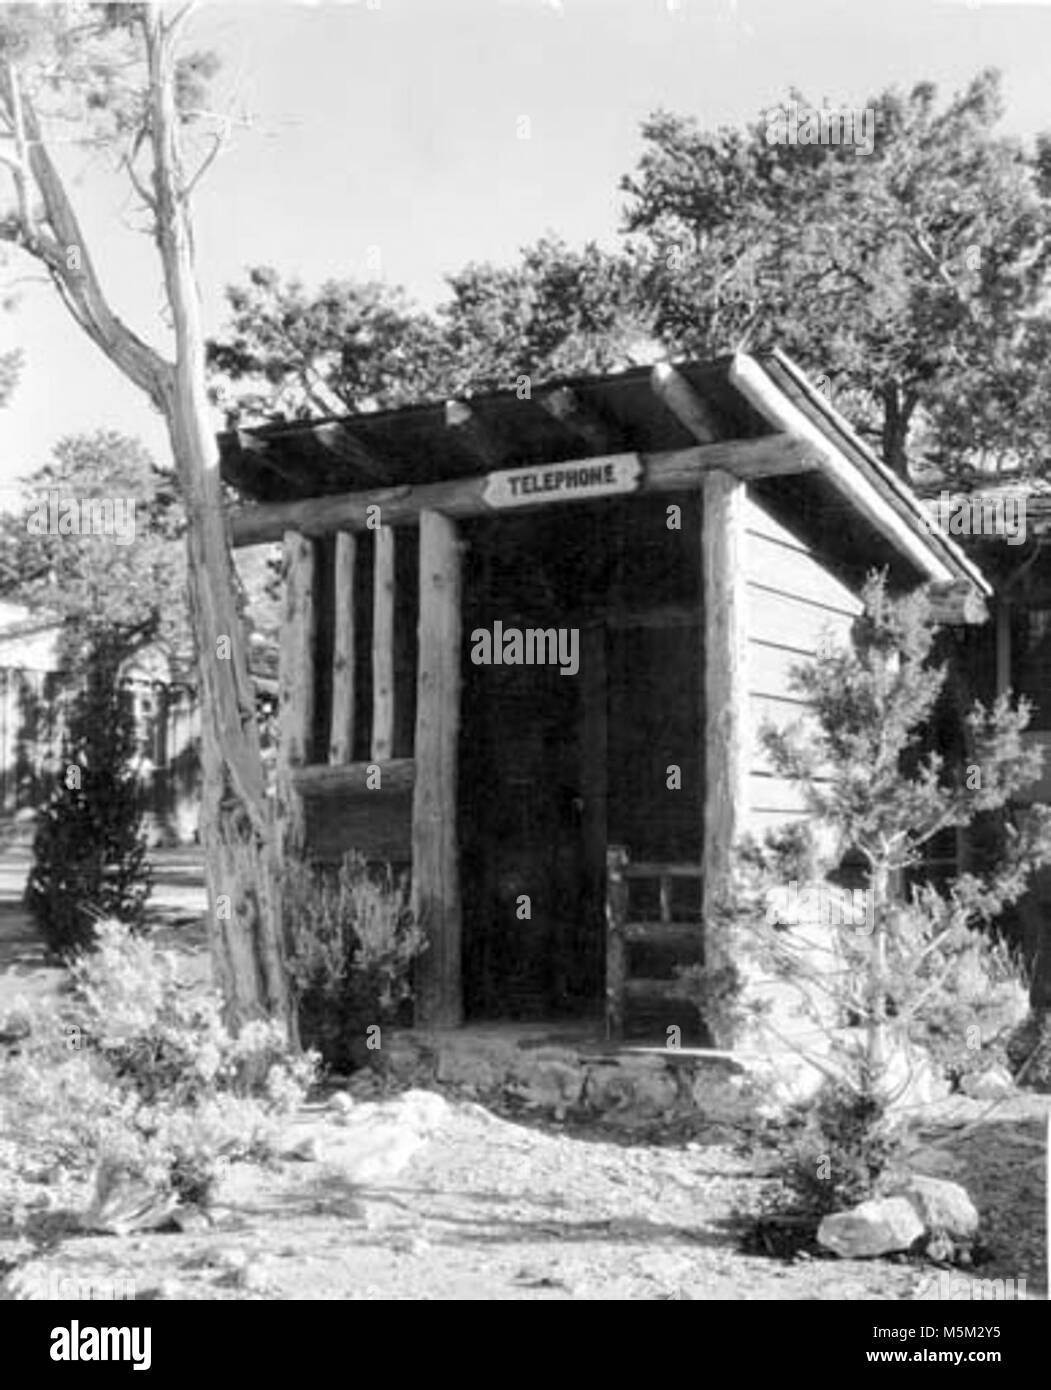 Grand Canyon Historic Bright Angel Lodge Exterior . BRIGHT ANGEL LODGE CABINS TELEPHONE BOOTH.  CIRCA 1940S-1950S. Stock Photo